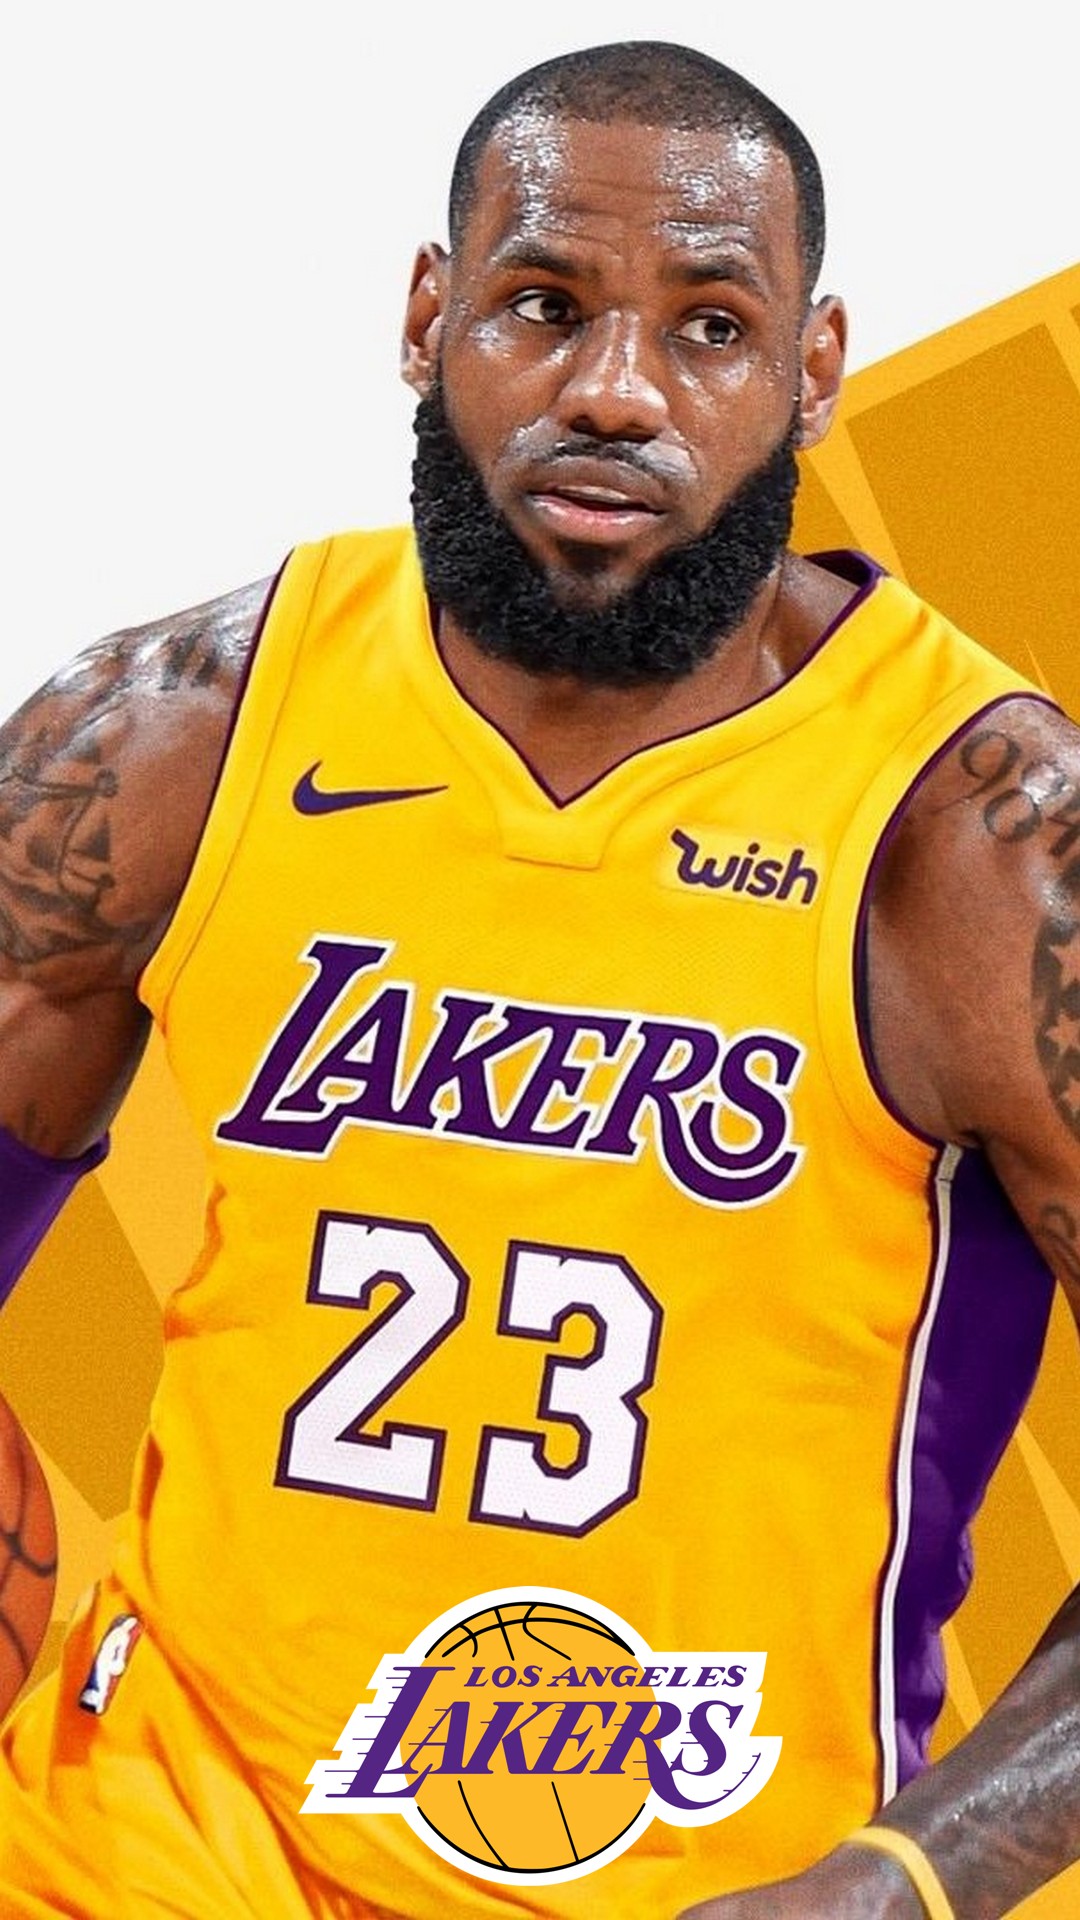 iPhone Wallpaper HD LeBron James Lakers with image dimensions 1080x1920 pixel. You can make this wallpaper for your Desktop Computer Backgrounds, Windows or Mac Screensavers, iPhone Lock screen, Tablet or Android and another Mobile Phone device